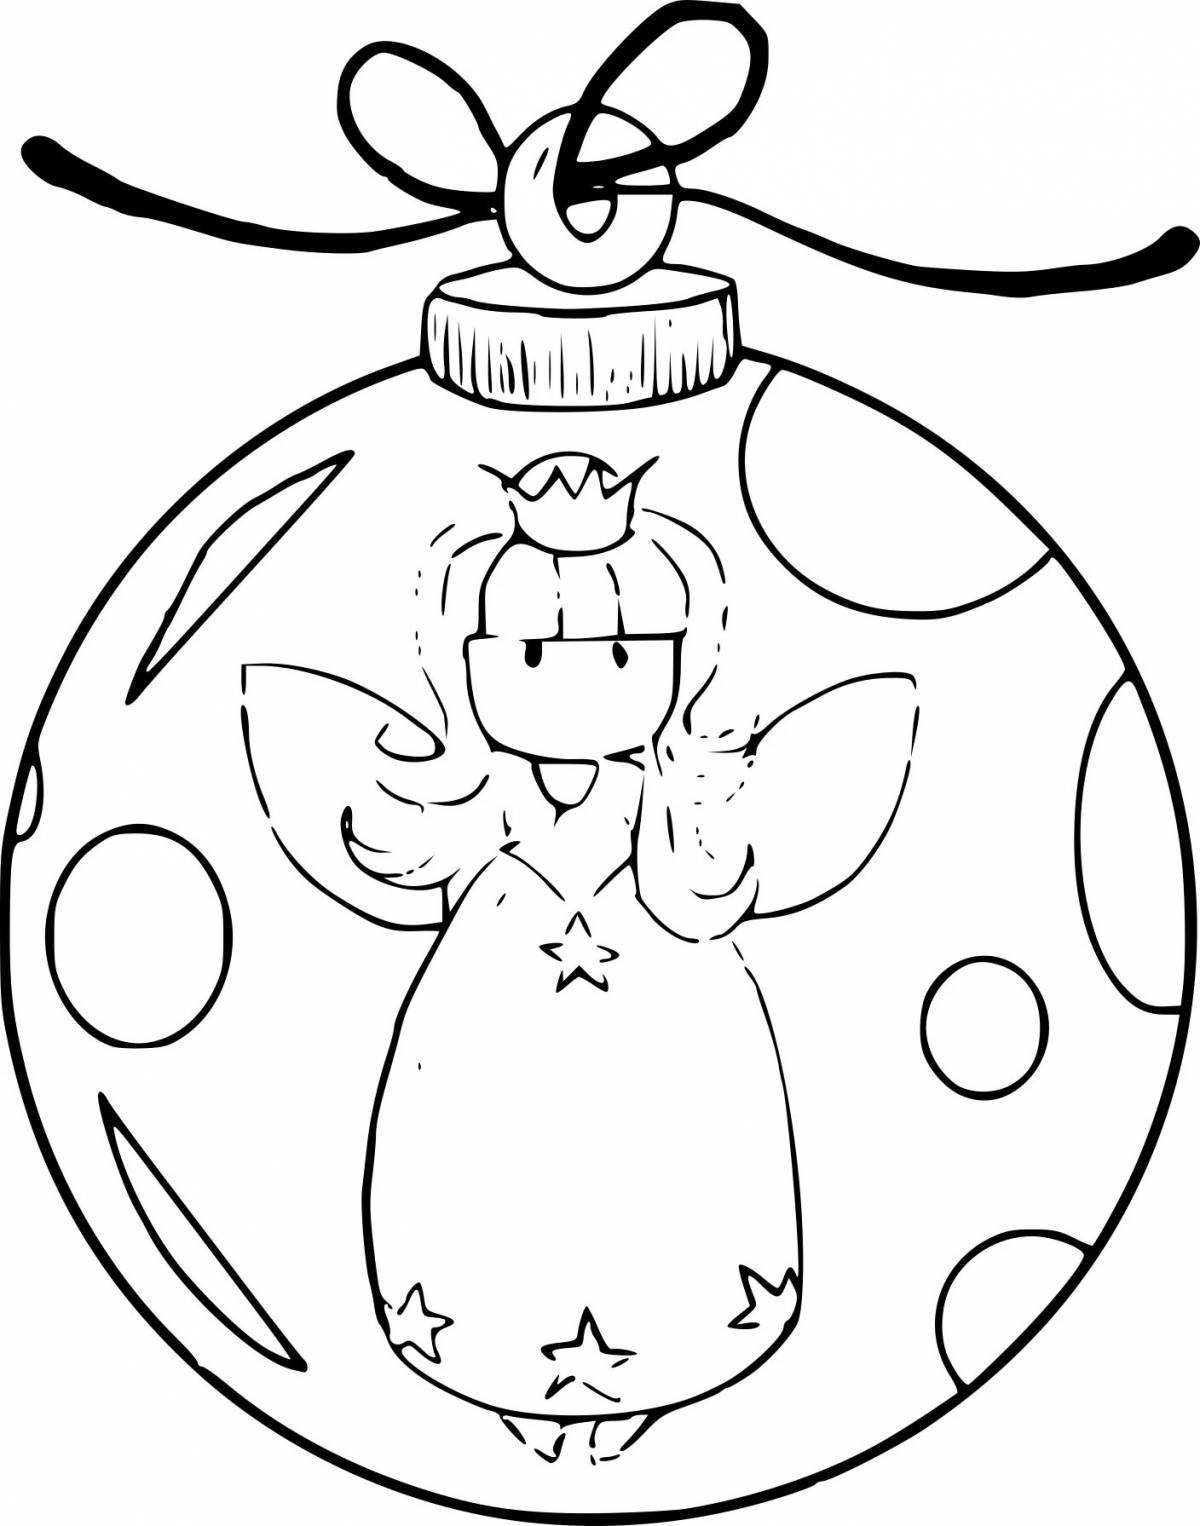 Coloring book magical Christmas angel